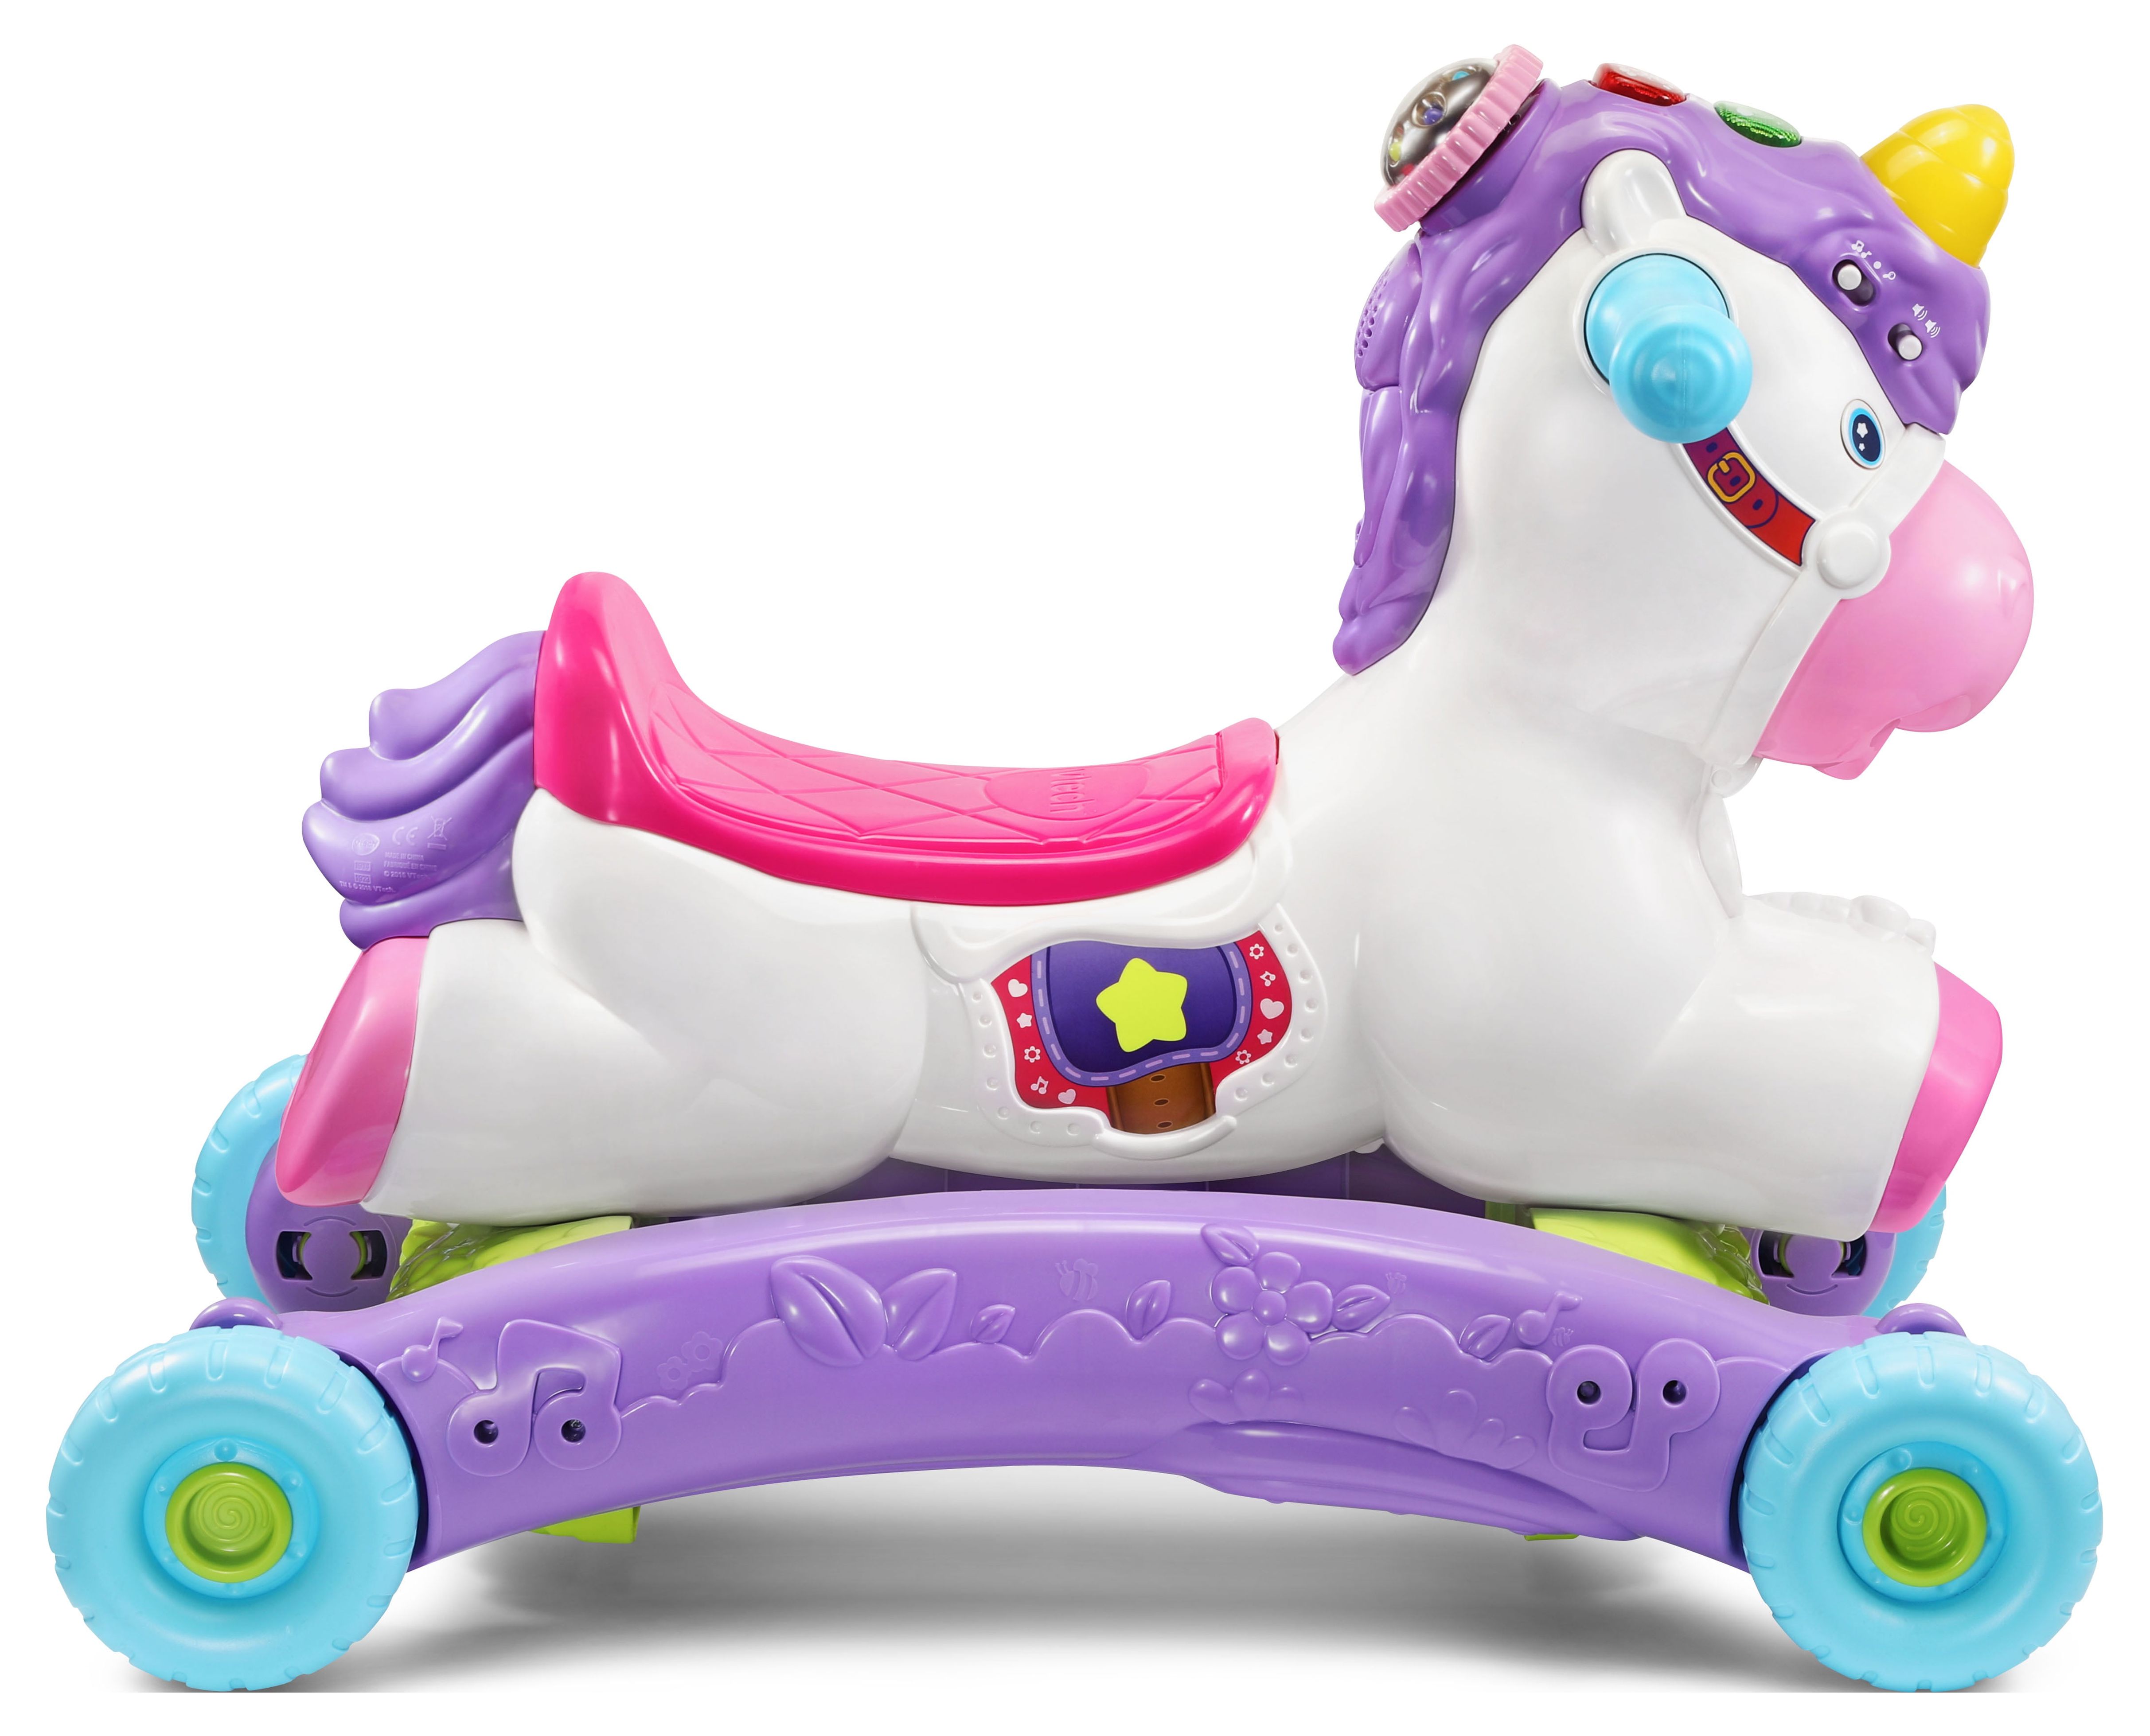 VTech Prance and Rock Learning Unicorn, Rocker to Rider Toy, Motion-Activated Responses - image 7 of 14